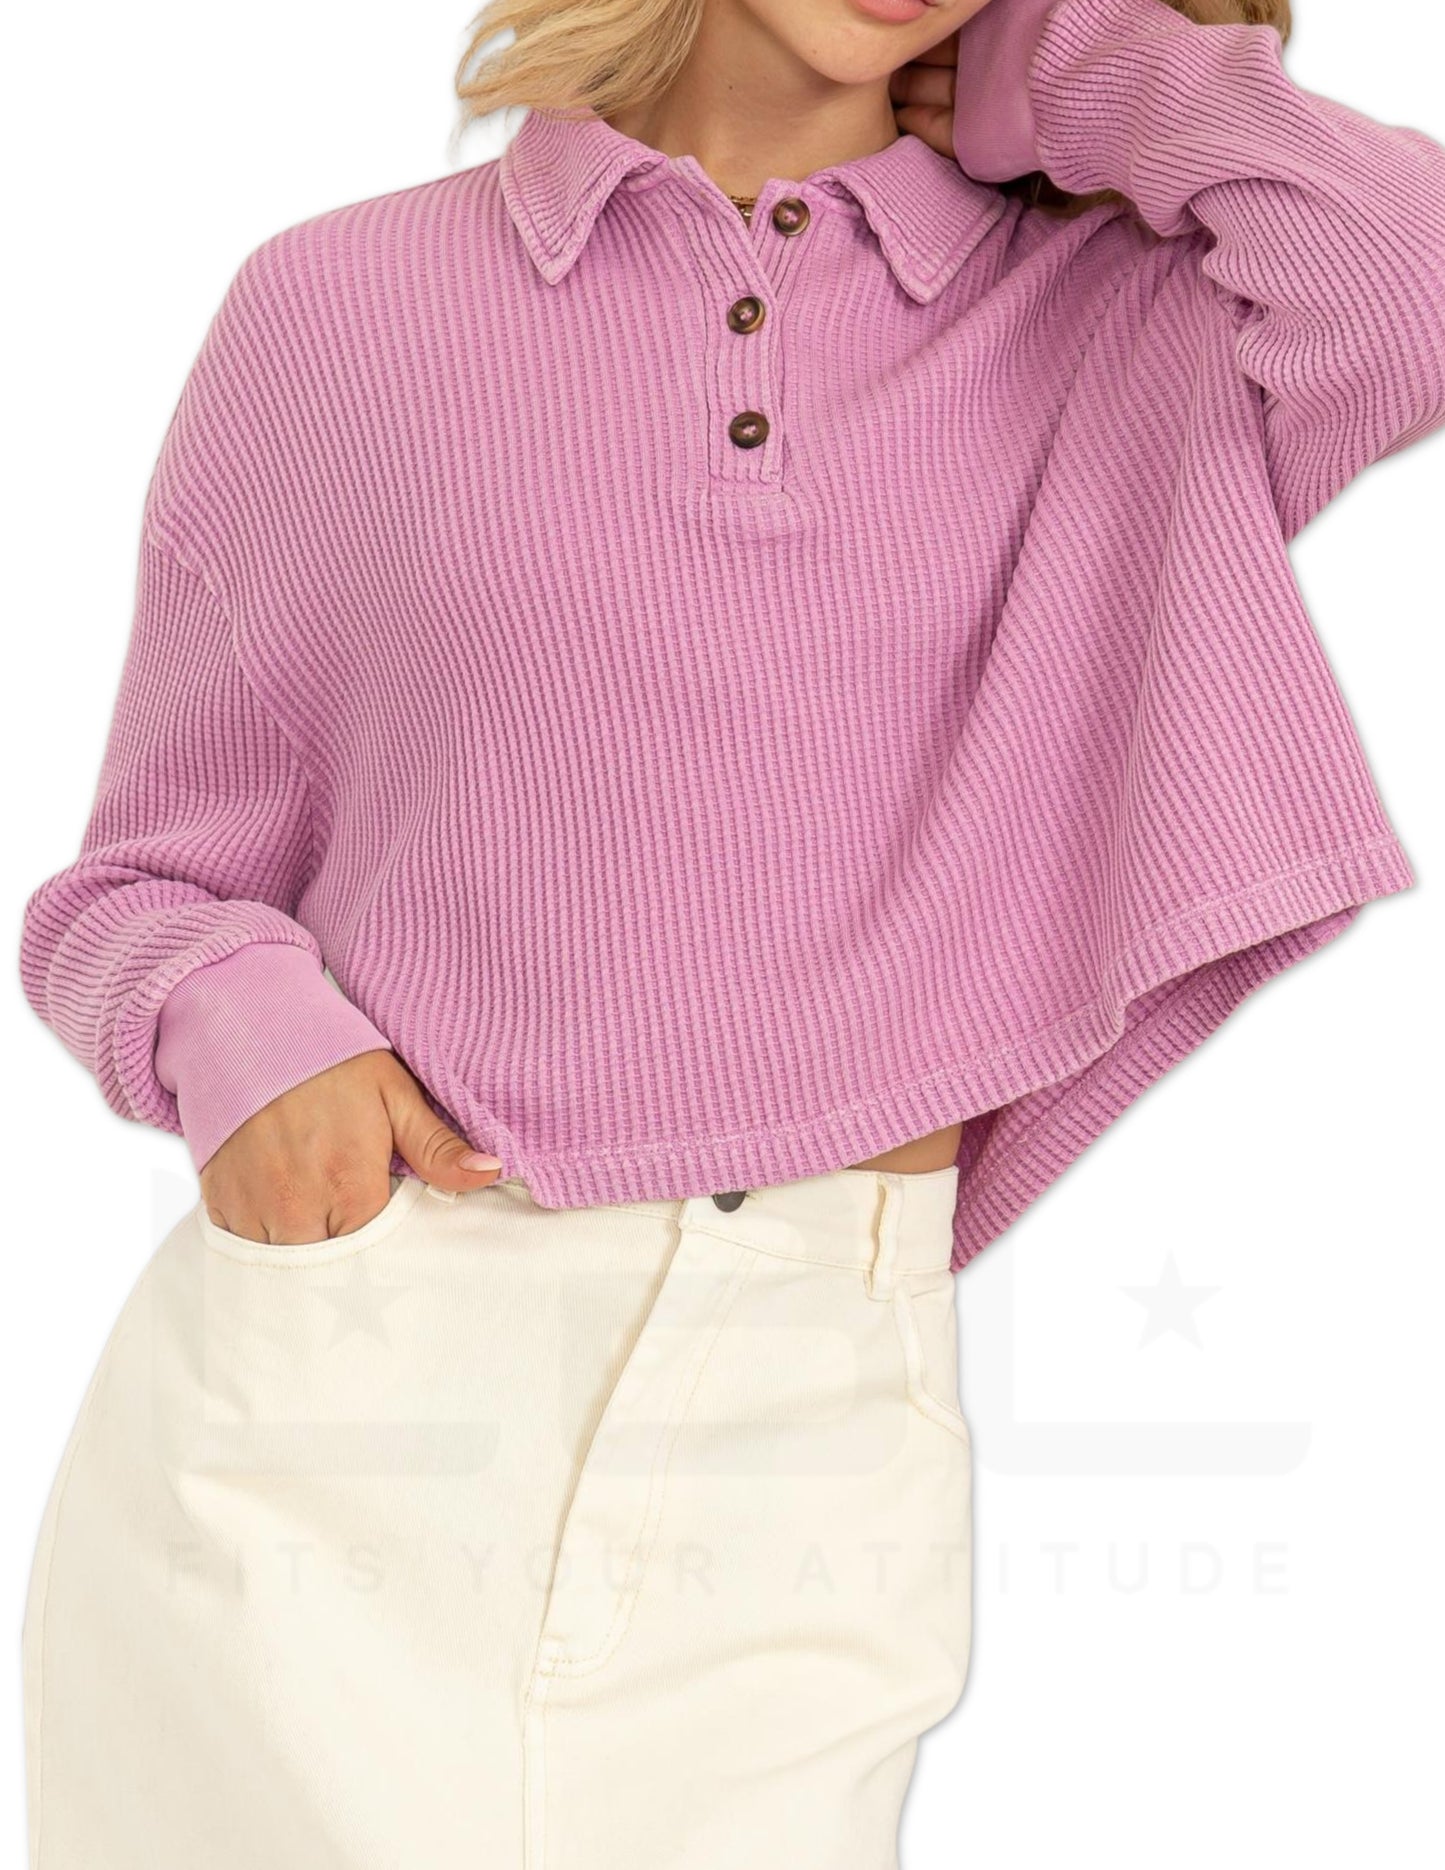 Collared Button Front Top - Vintage Plum